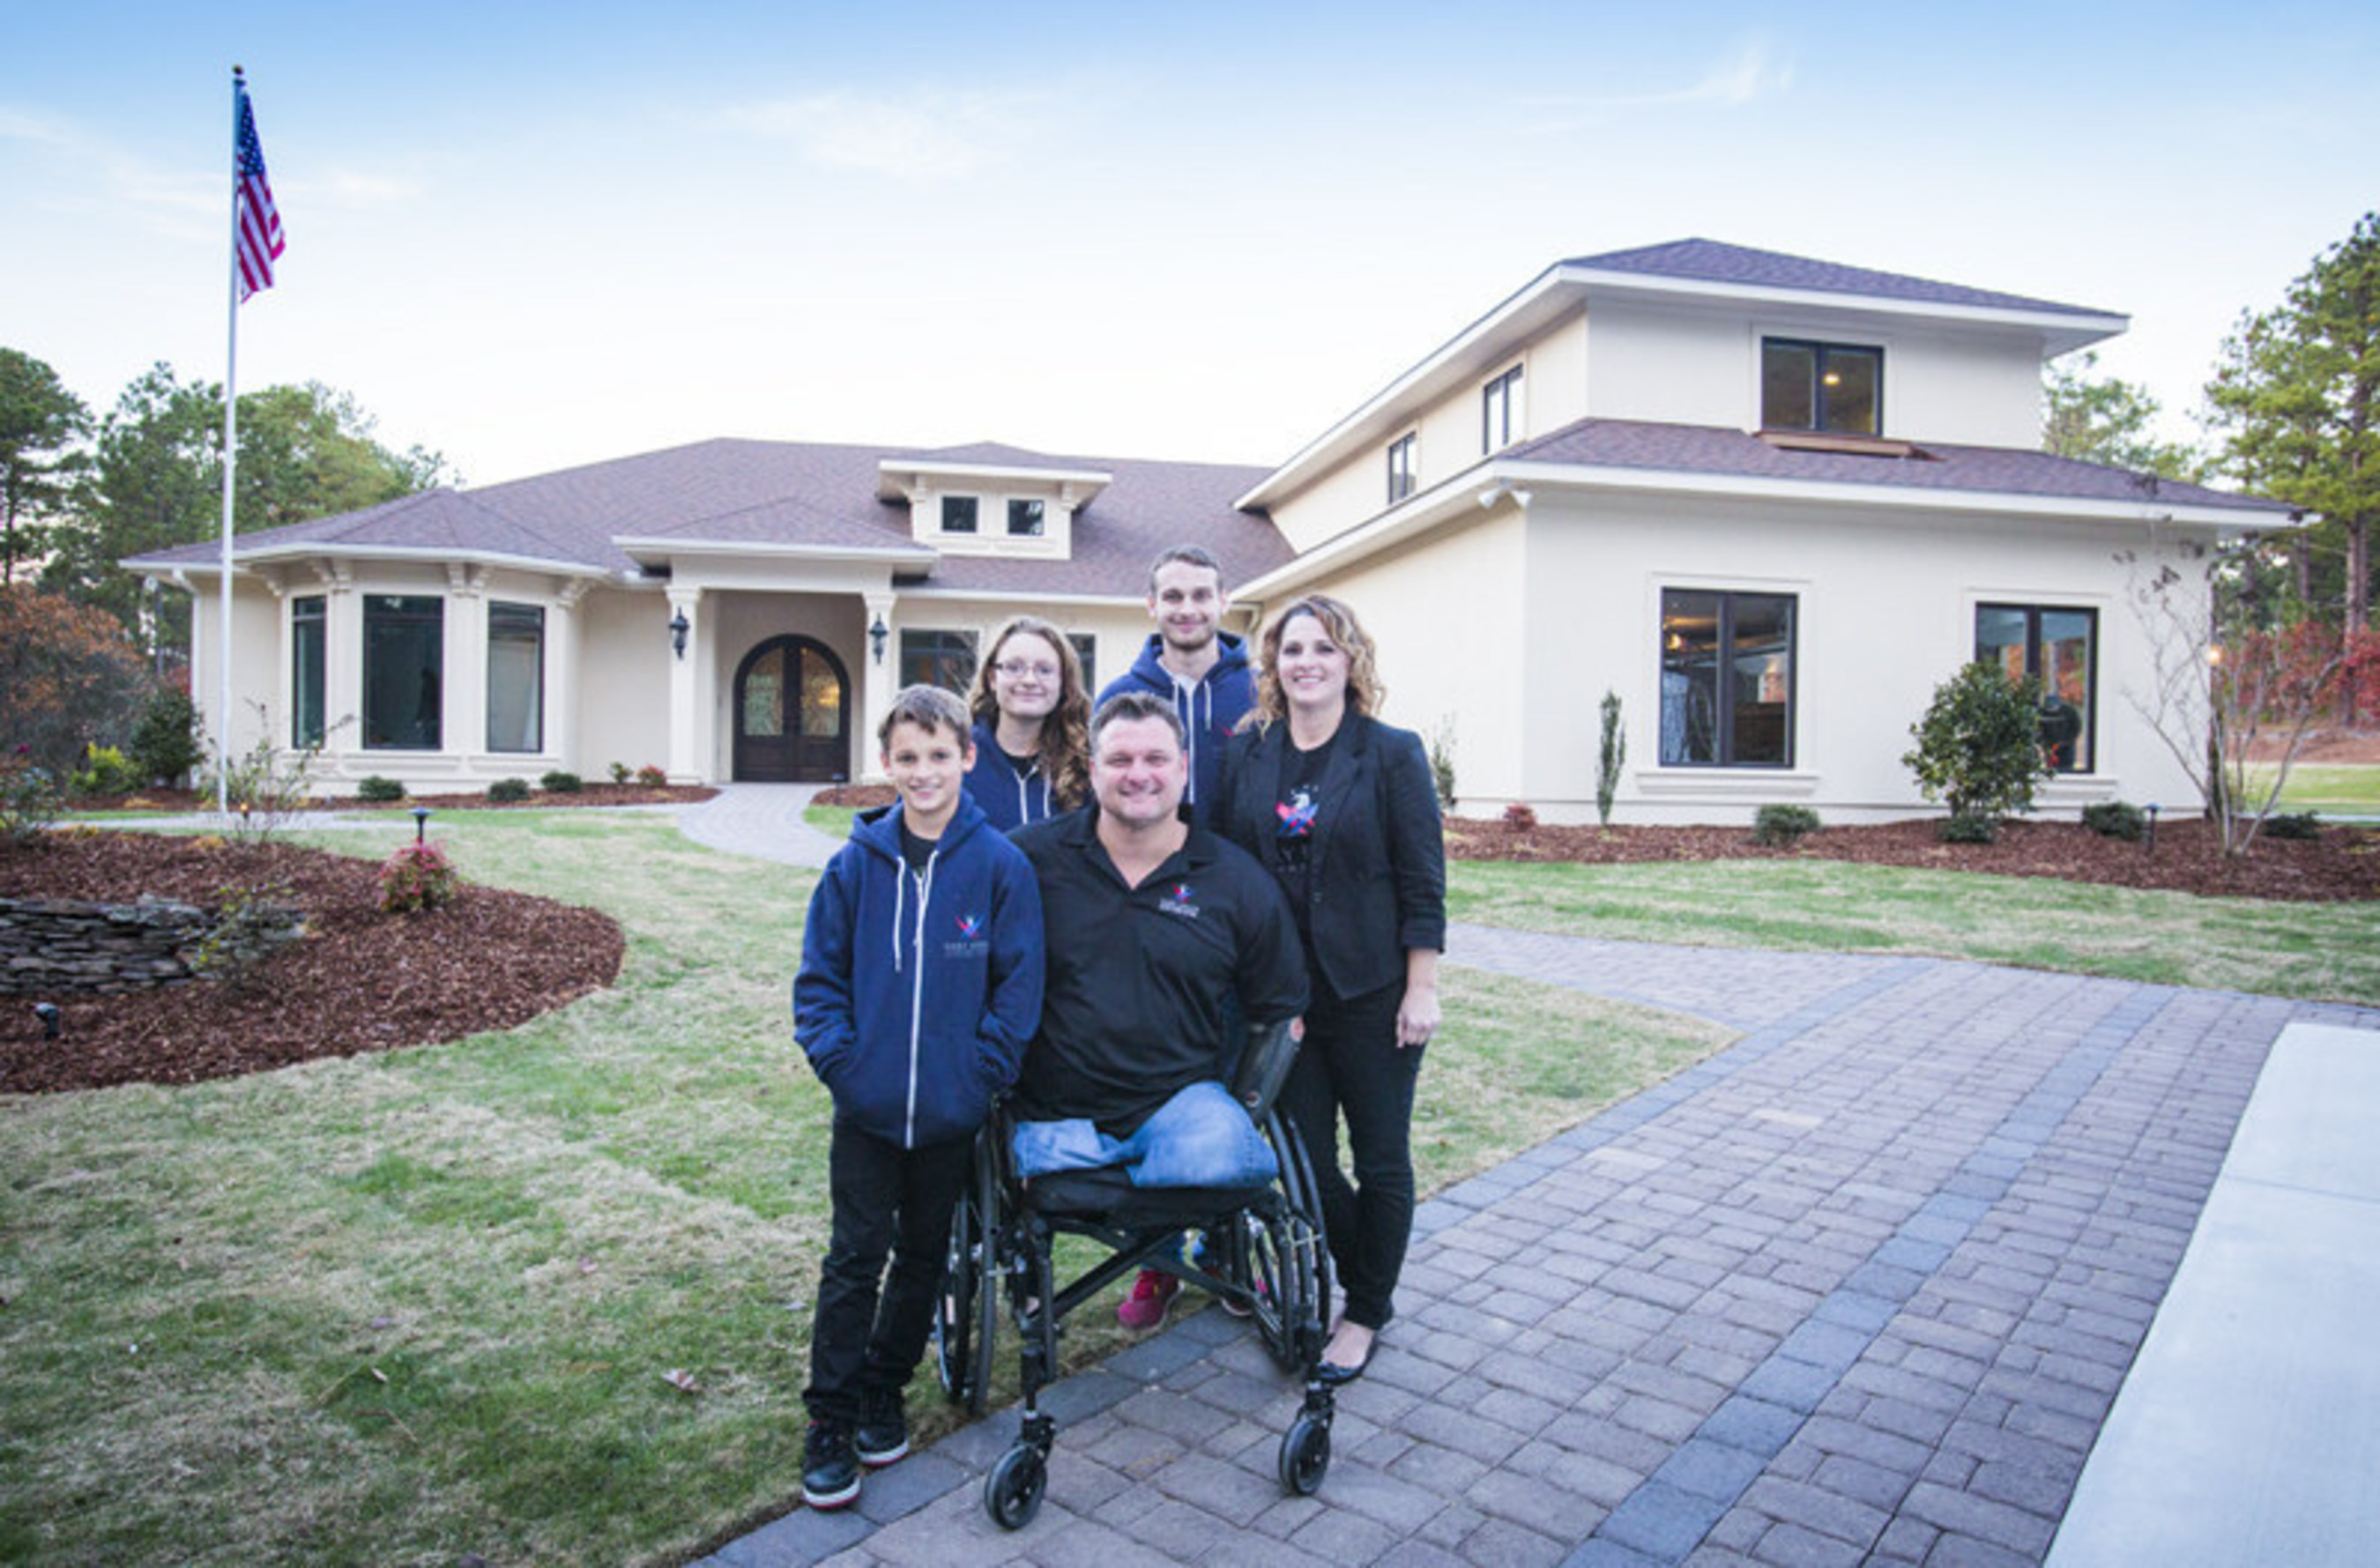 Triple amputee MSG John Masson and his family outside their new specially adapted Smart Home in Southern Pines, North Carolina, courtesy of Building for America's Bravest - a partner program between the Gary Sinise Foundation's R.I.S.E. program and Stephen Siller Tunnel To Towers Foundation